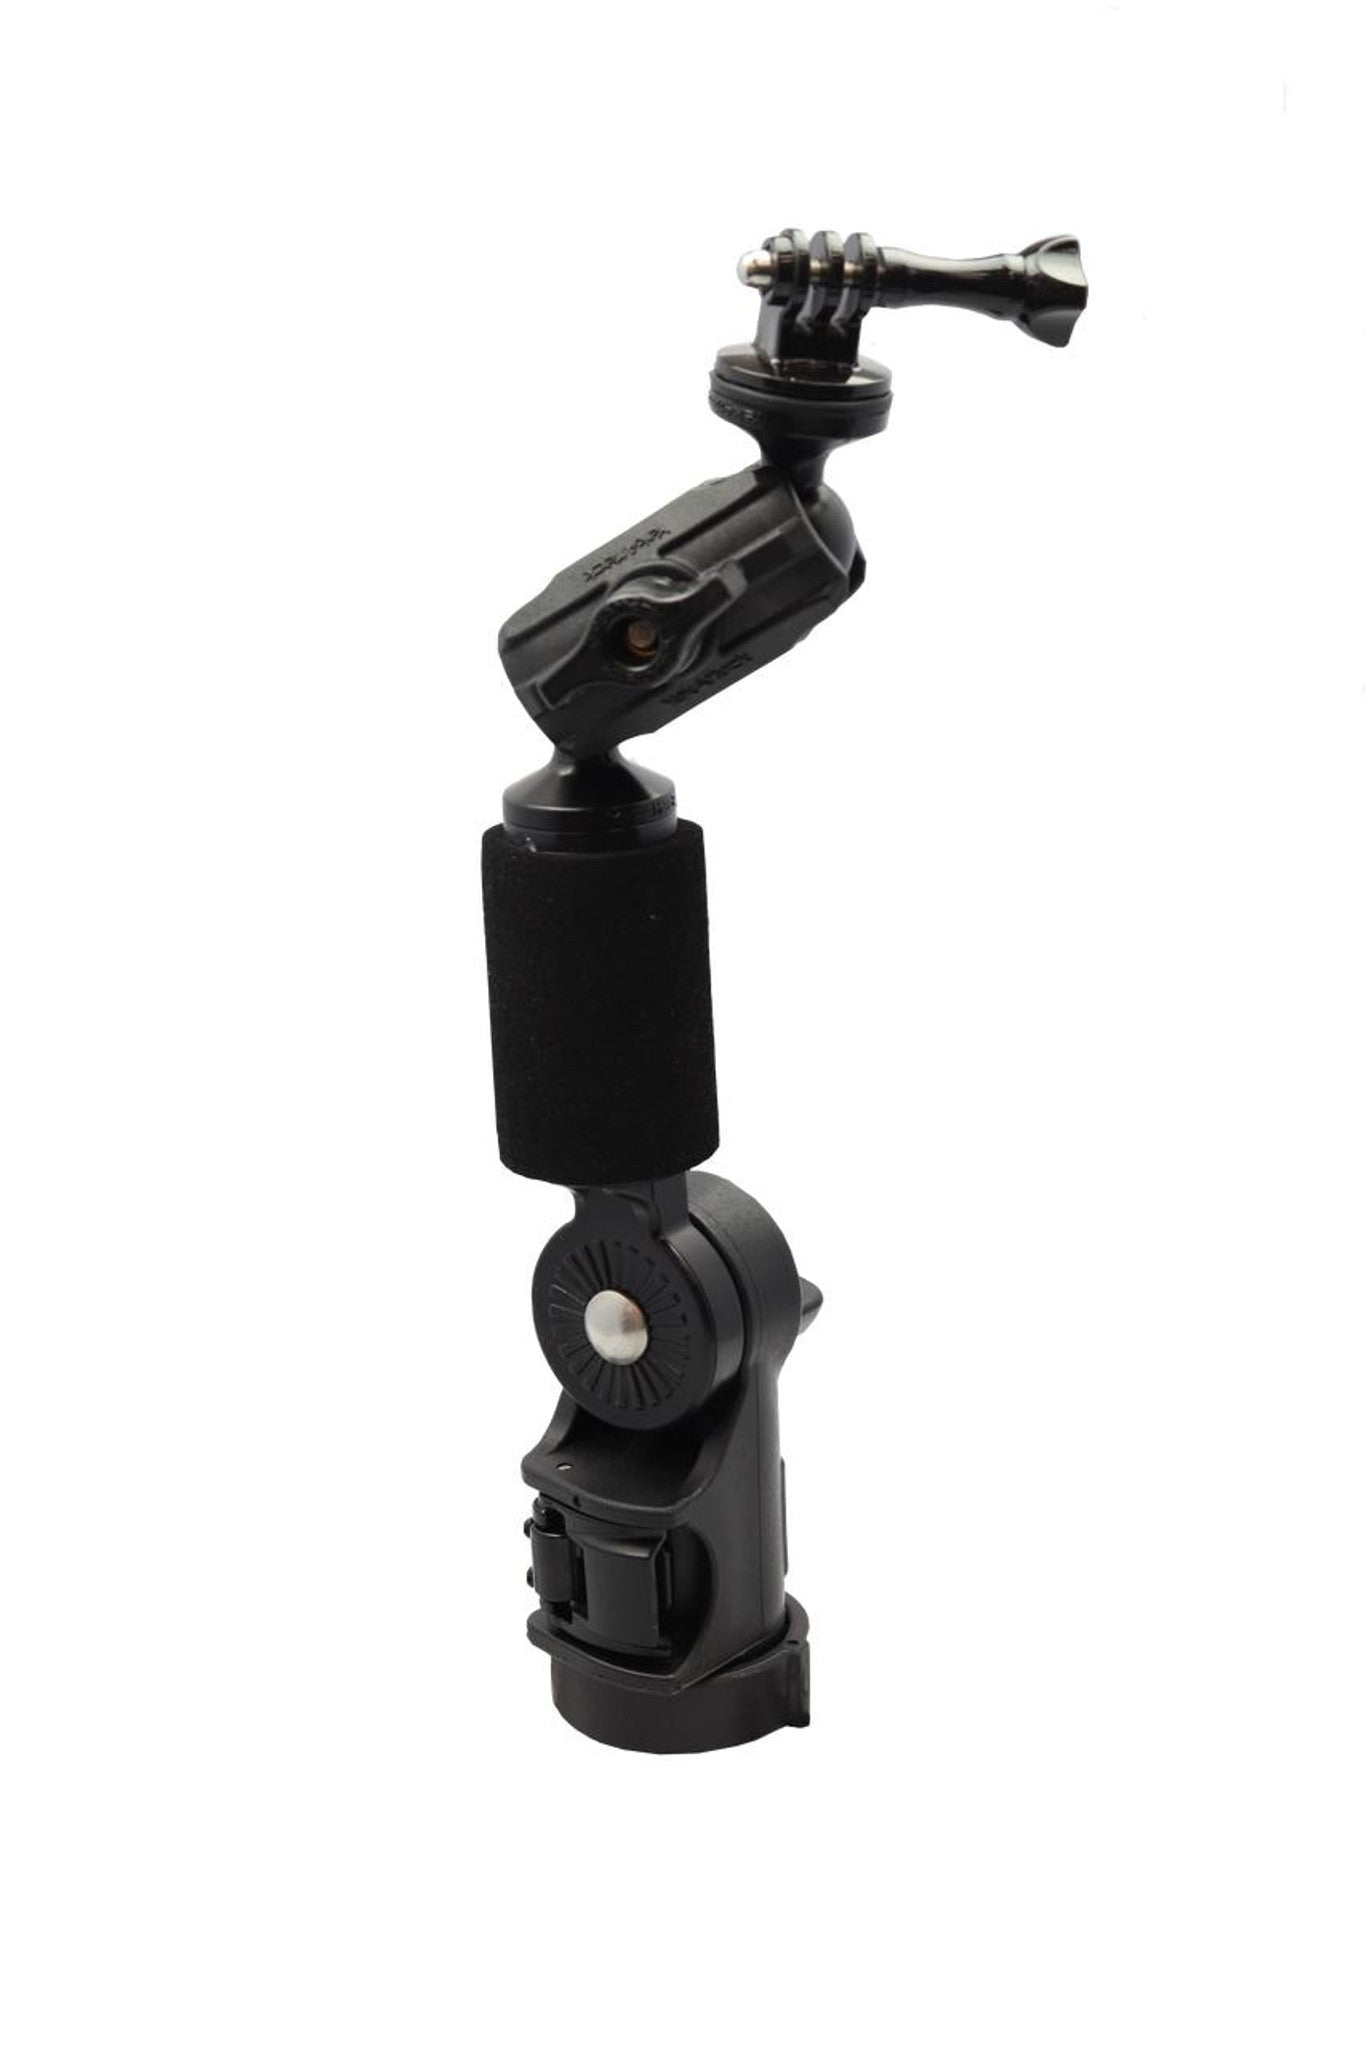 PanFish Portrait Pro Camera Mount, Includes 1/4-20 Mount and GoPro Mount